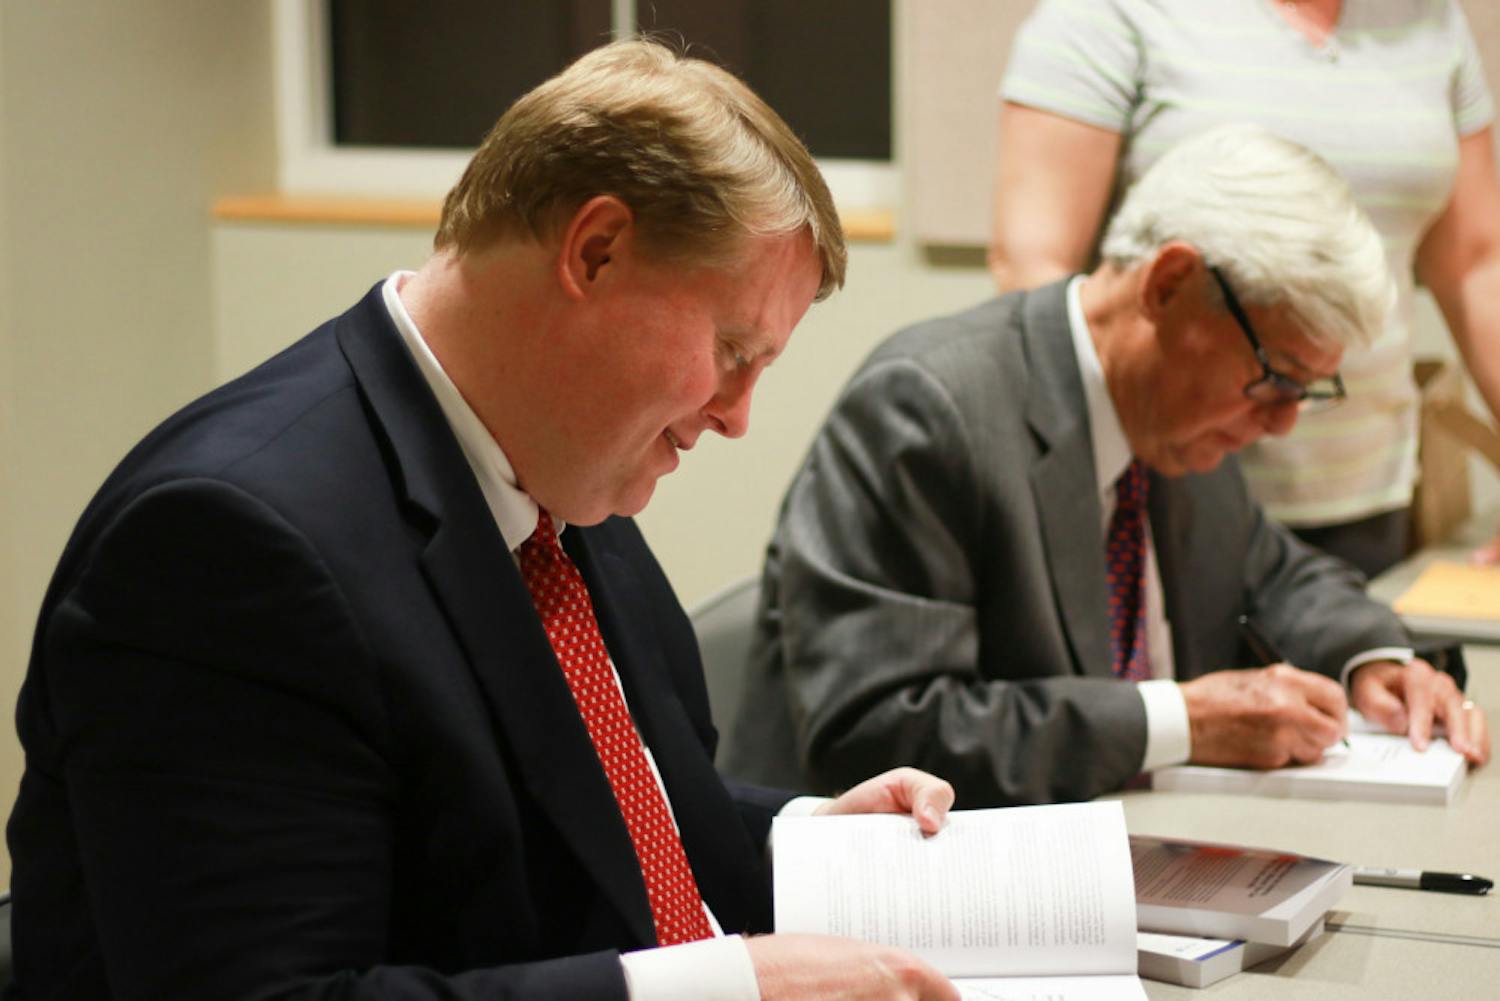 Chris Hand, a UF alumnus and attorney, signs copies of the second edition of “America, the Owner’s Manual: Making Government Work For You,” with the book’s co-author, former Florida Gov. Bob Graham.